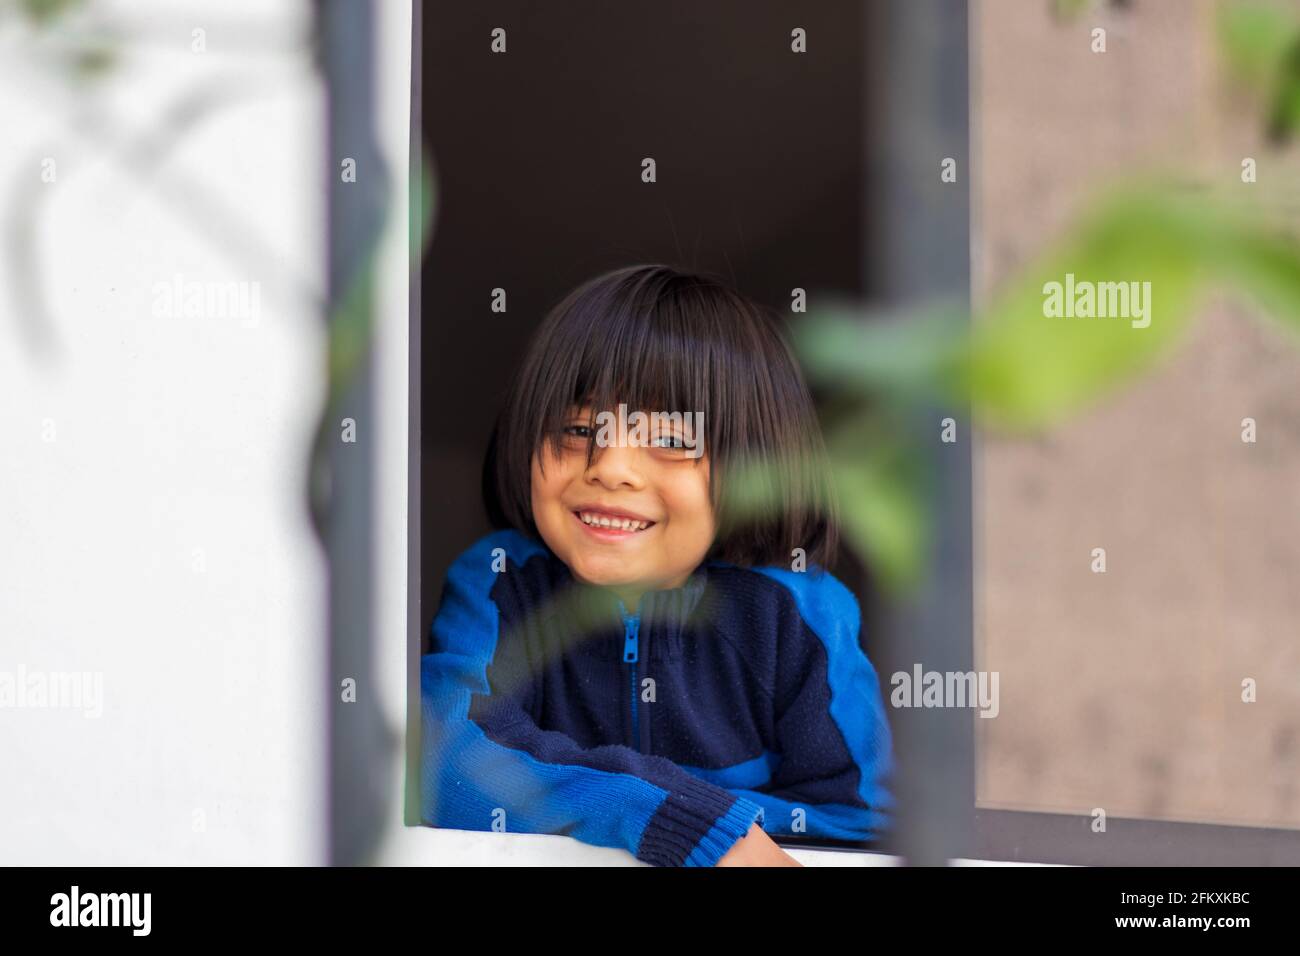 Hispanic boy child smiling from a window, selective focus Stock Photo